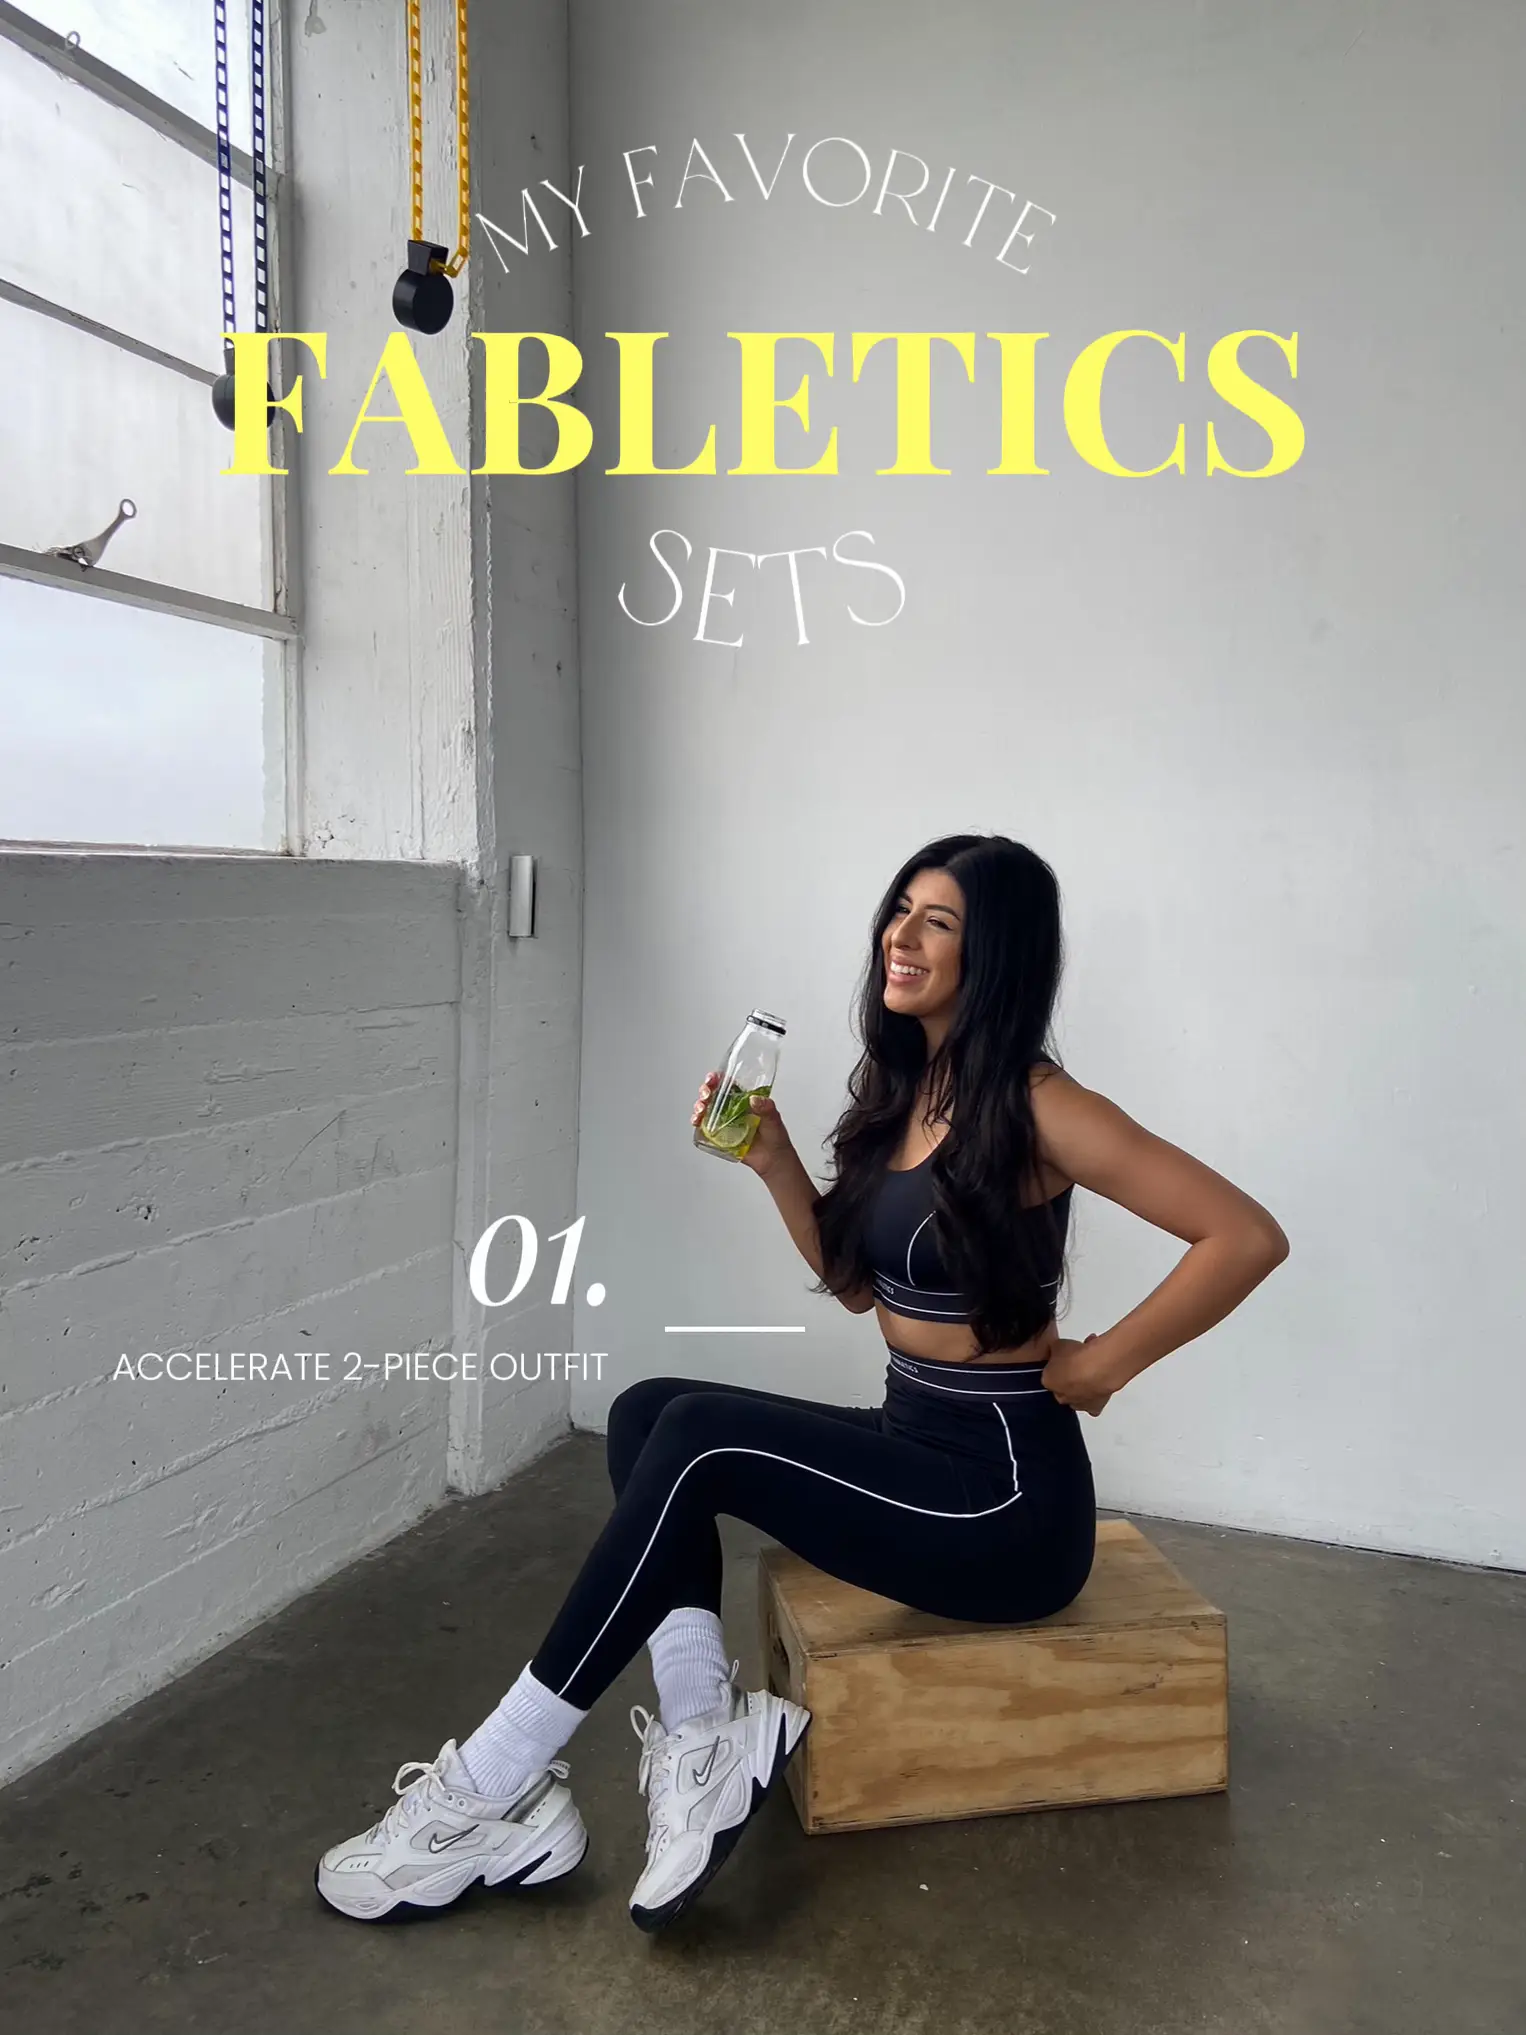 fabletics is having a sale rn yall 2 for $24 leggings #fabletics